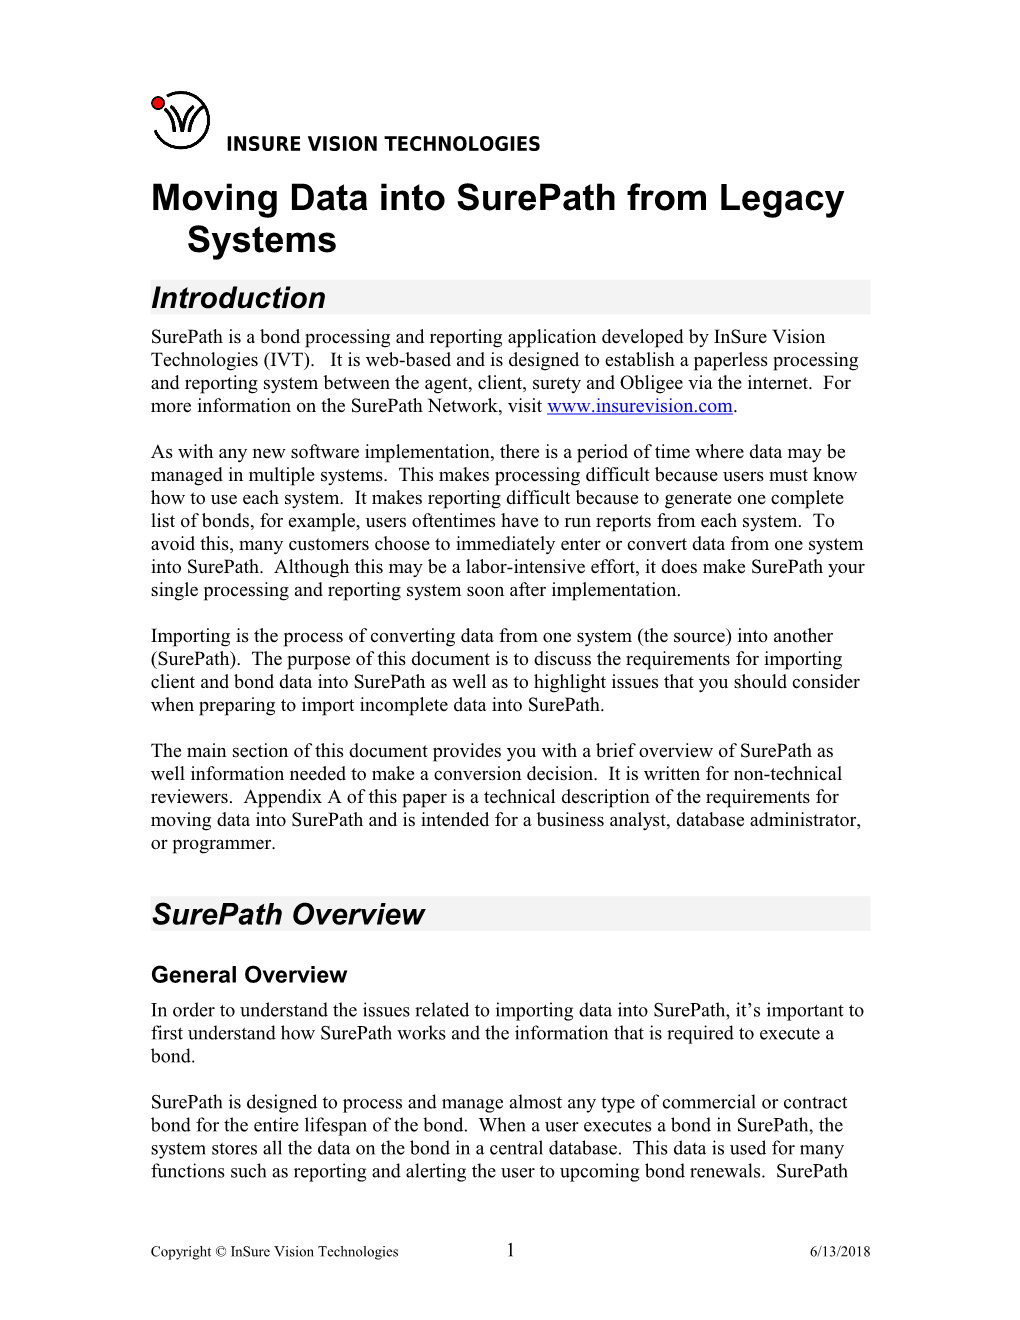 Moving Data Into Surepath from Legacy Systems